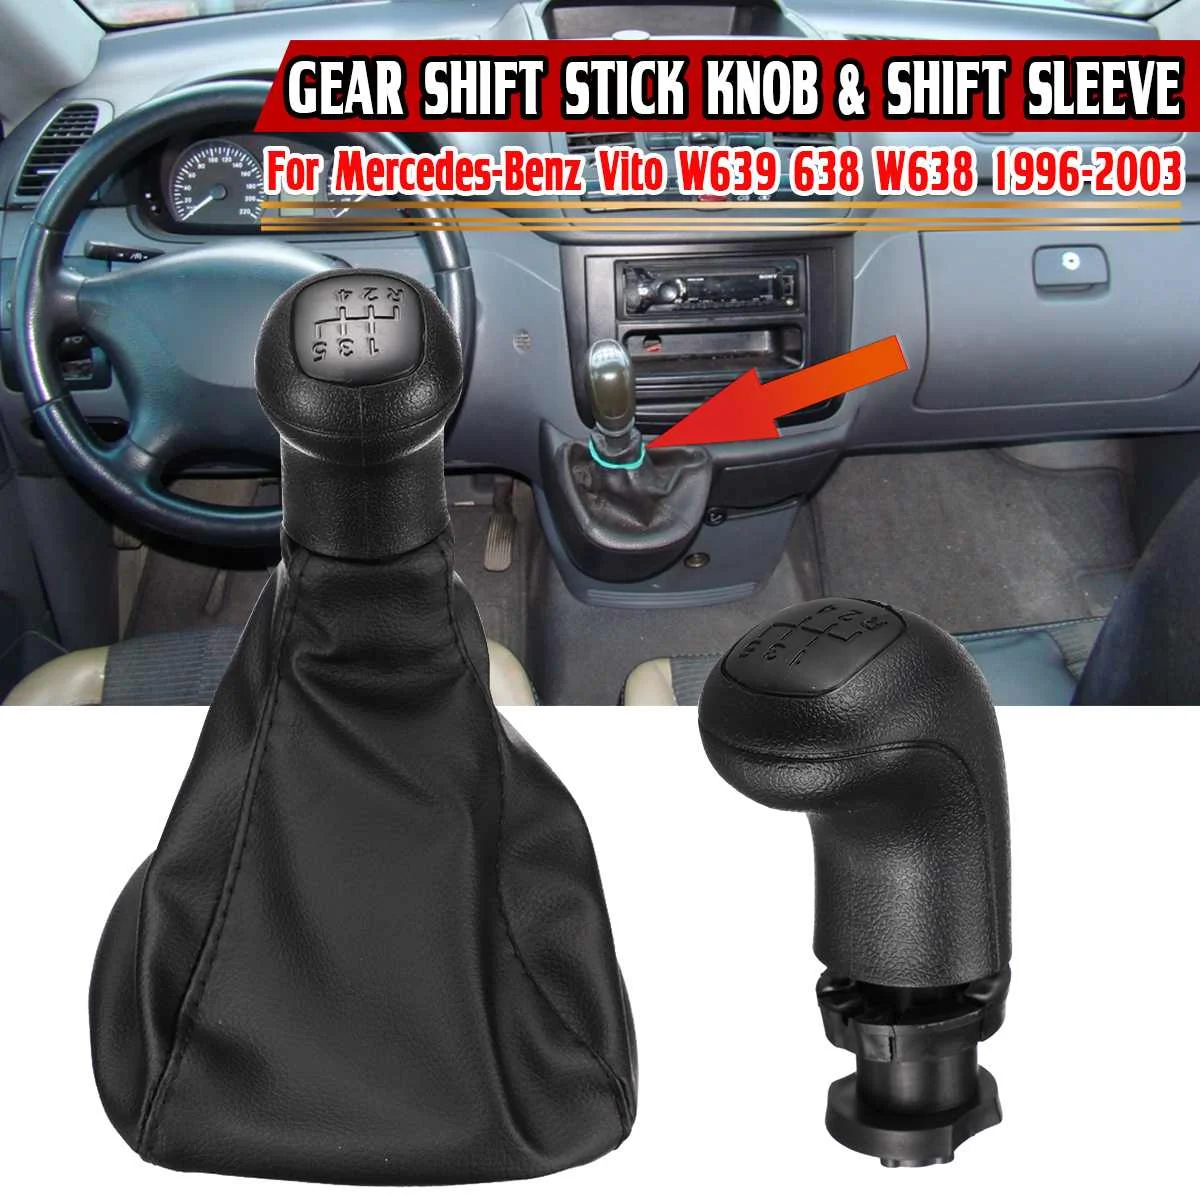 

5 Speed Manual Gear Shift Stick Knob Lever Handle Shift Sleeve Boot Gaiter for Mercedes for Benz Vito W639 638 W638 1996-2003